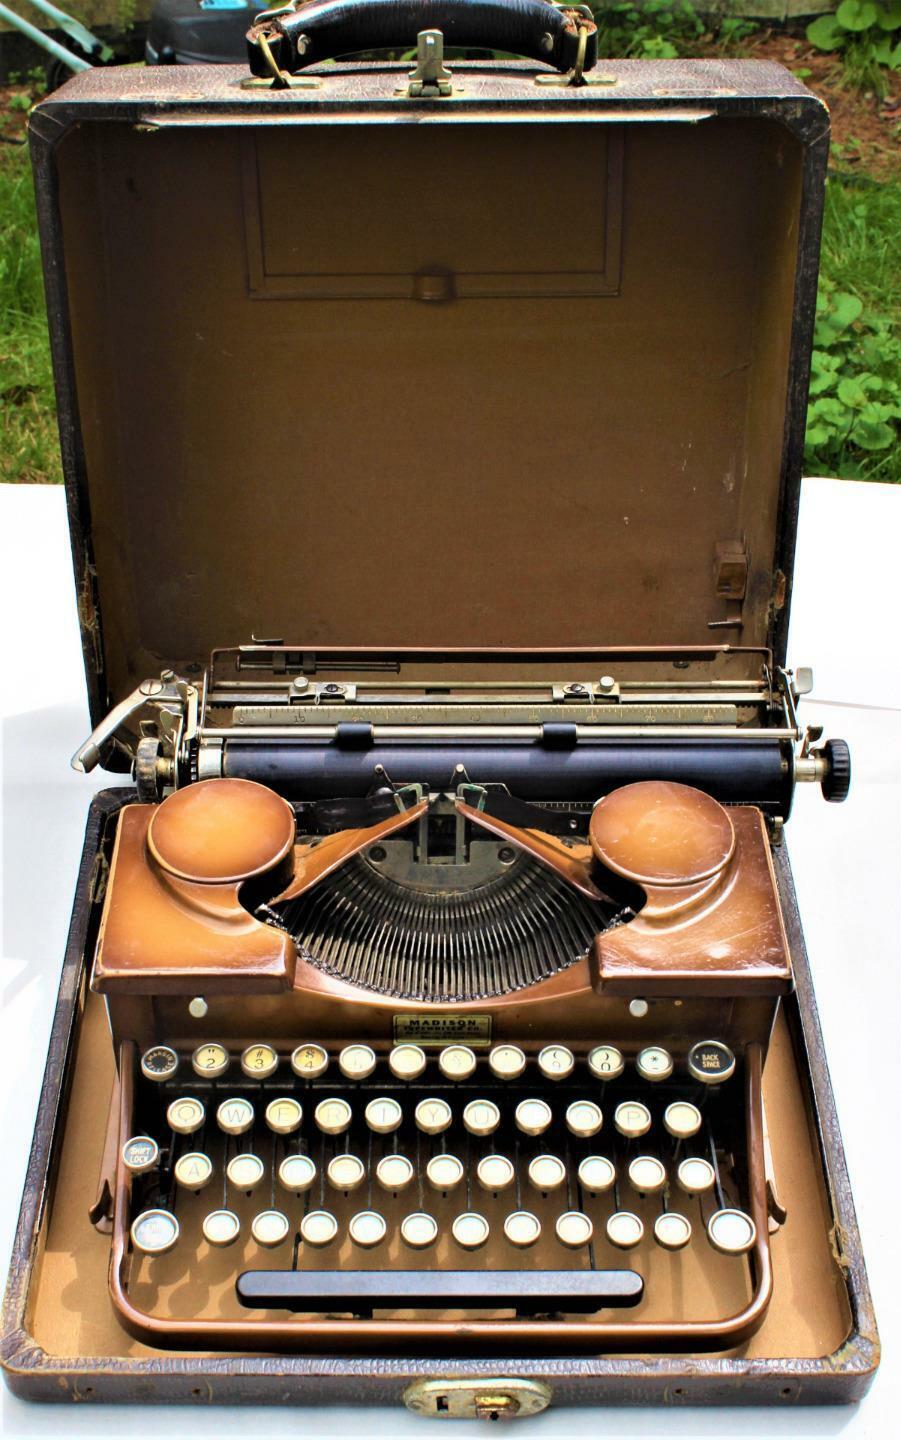 1931 Royal P Portable Typewriter Rare Duotone Green Antique P292968,Magnificant